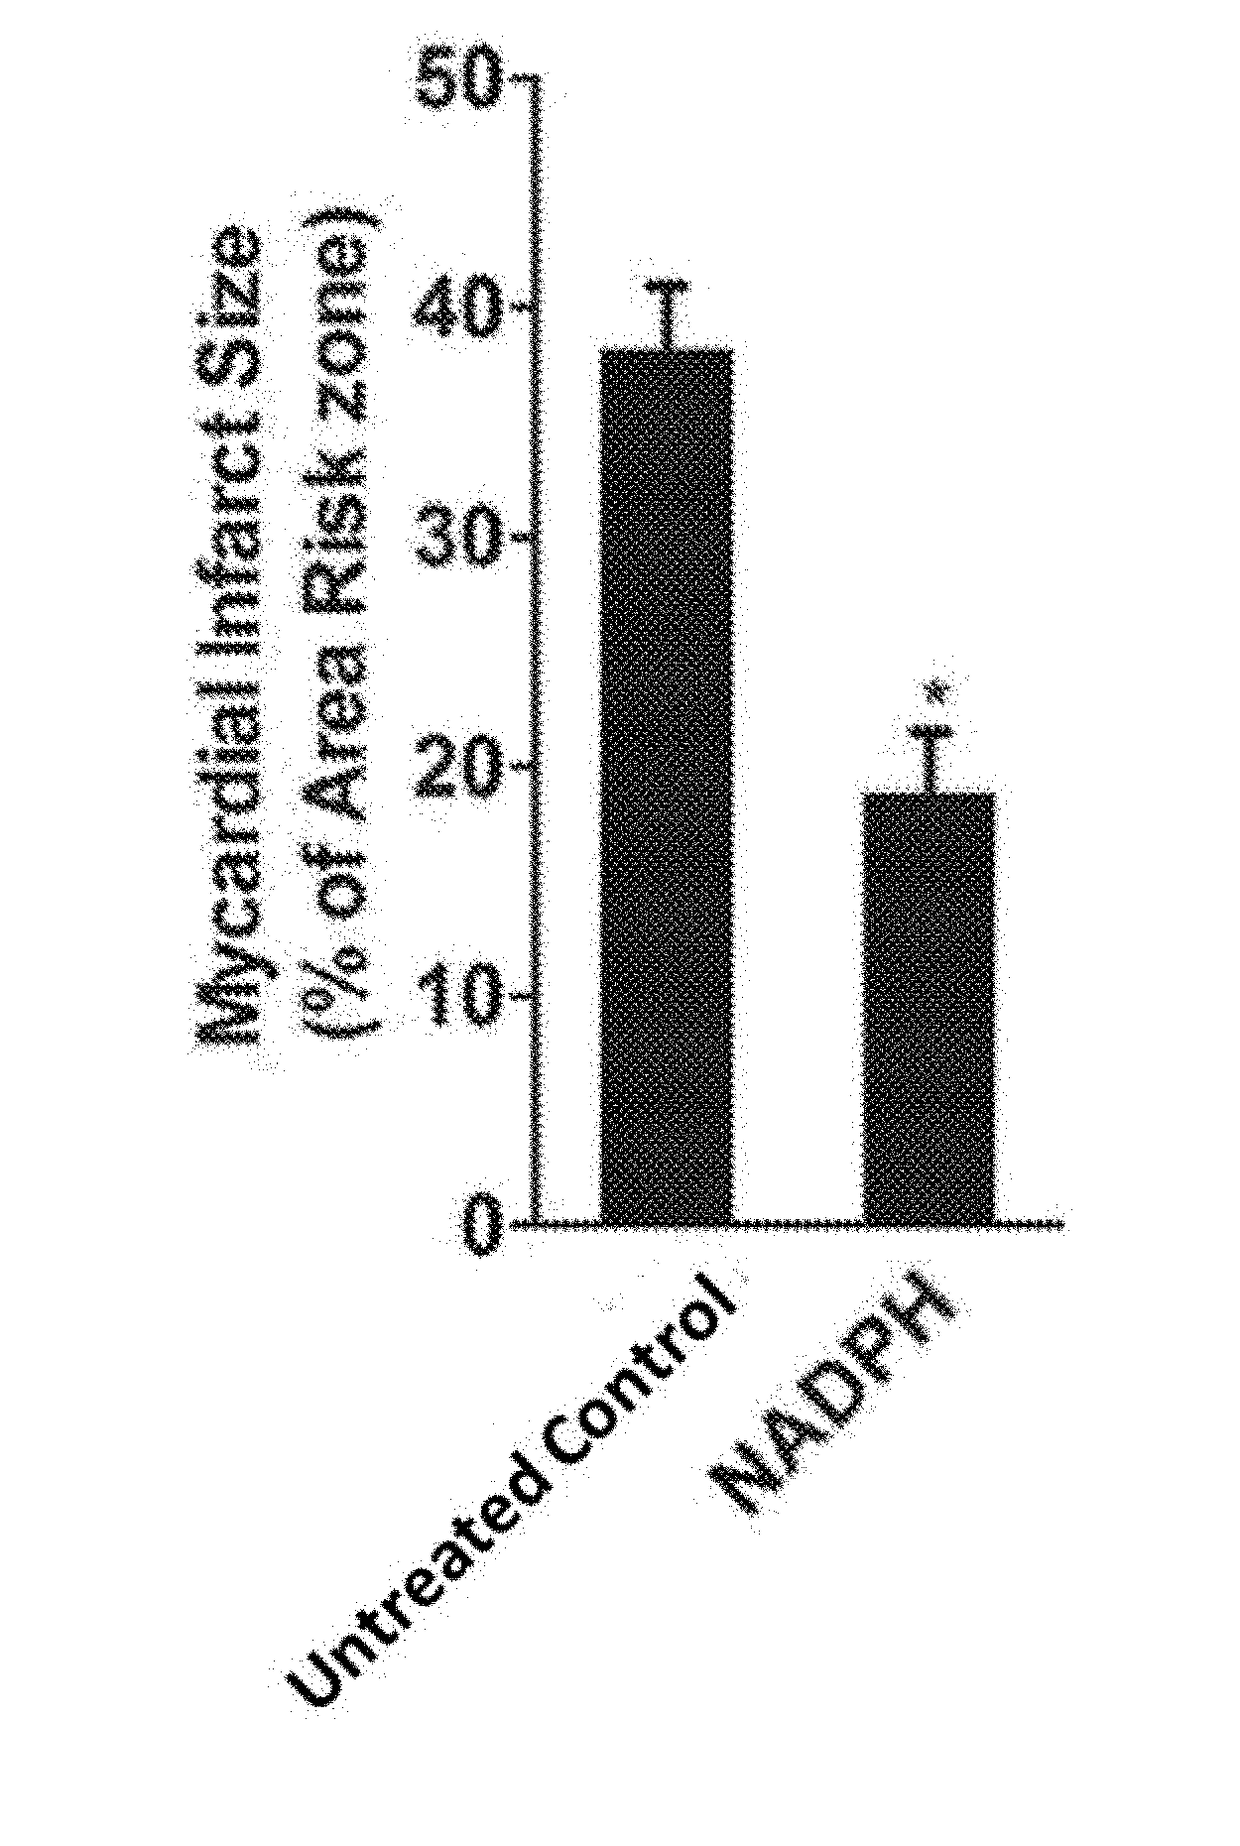 Use of nadph in preparing medicines for treatment of heart diseases